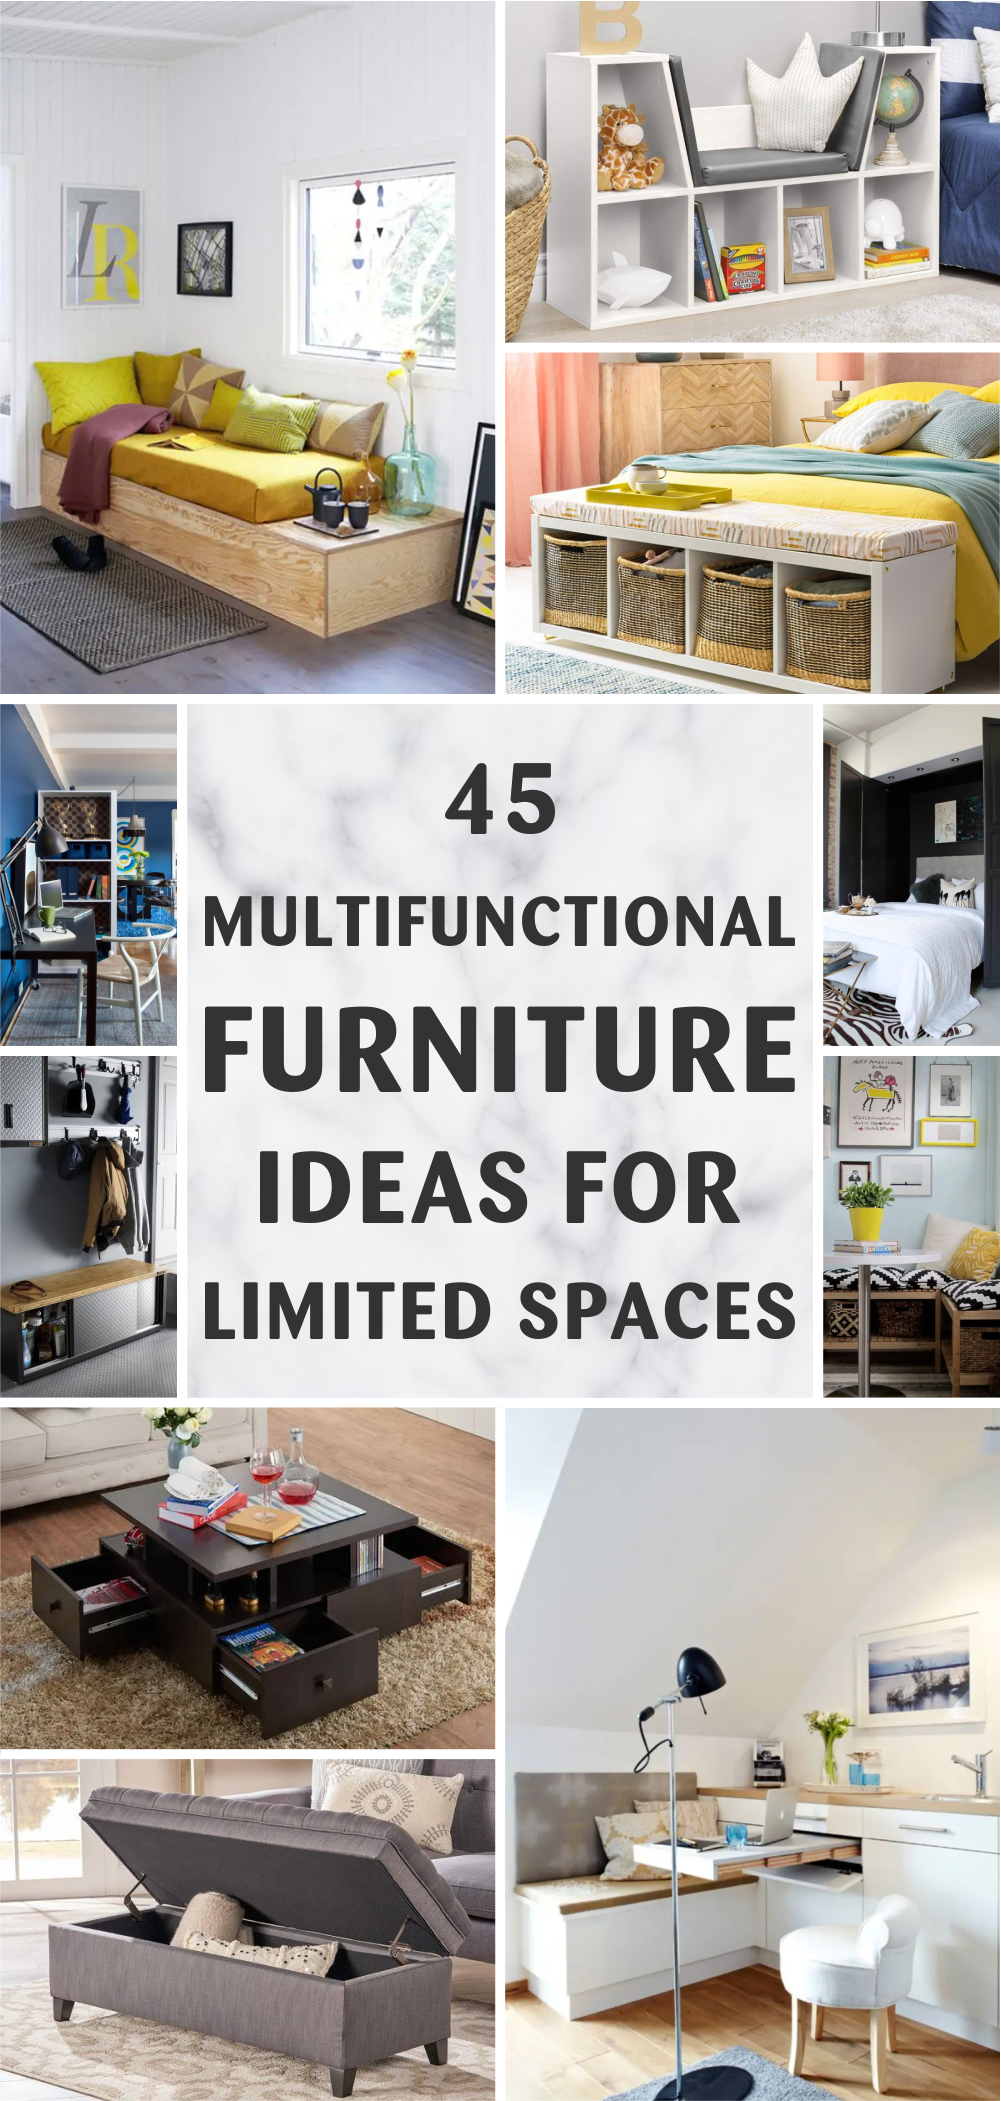 45 Multifunctional Furniture Ideas for Limited Spaces